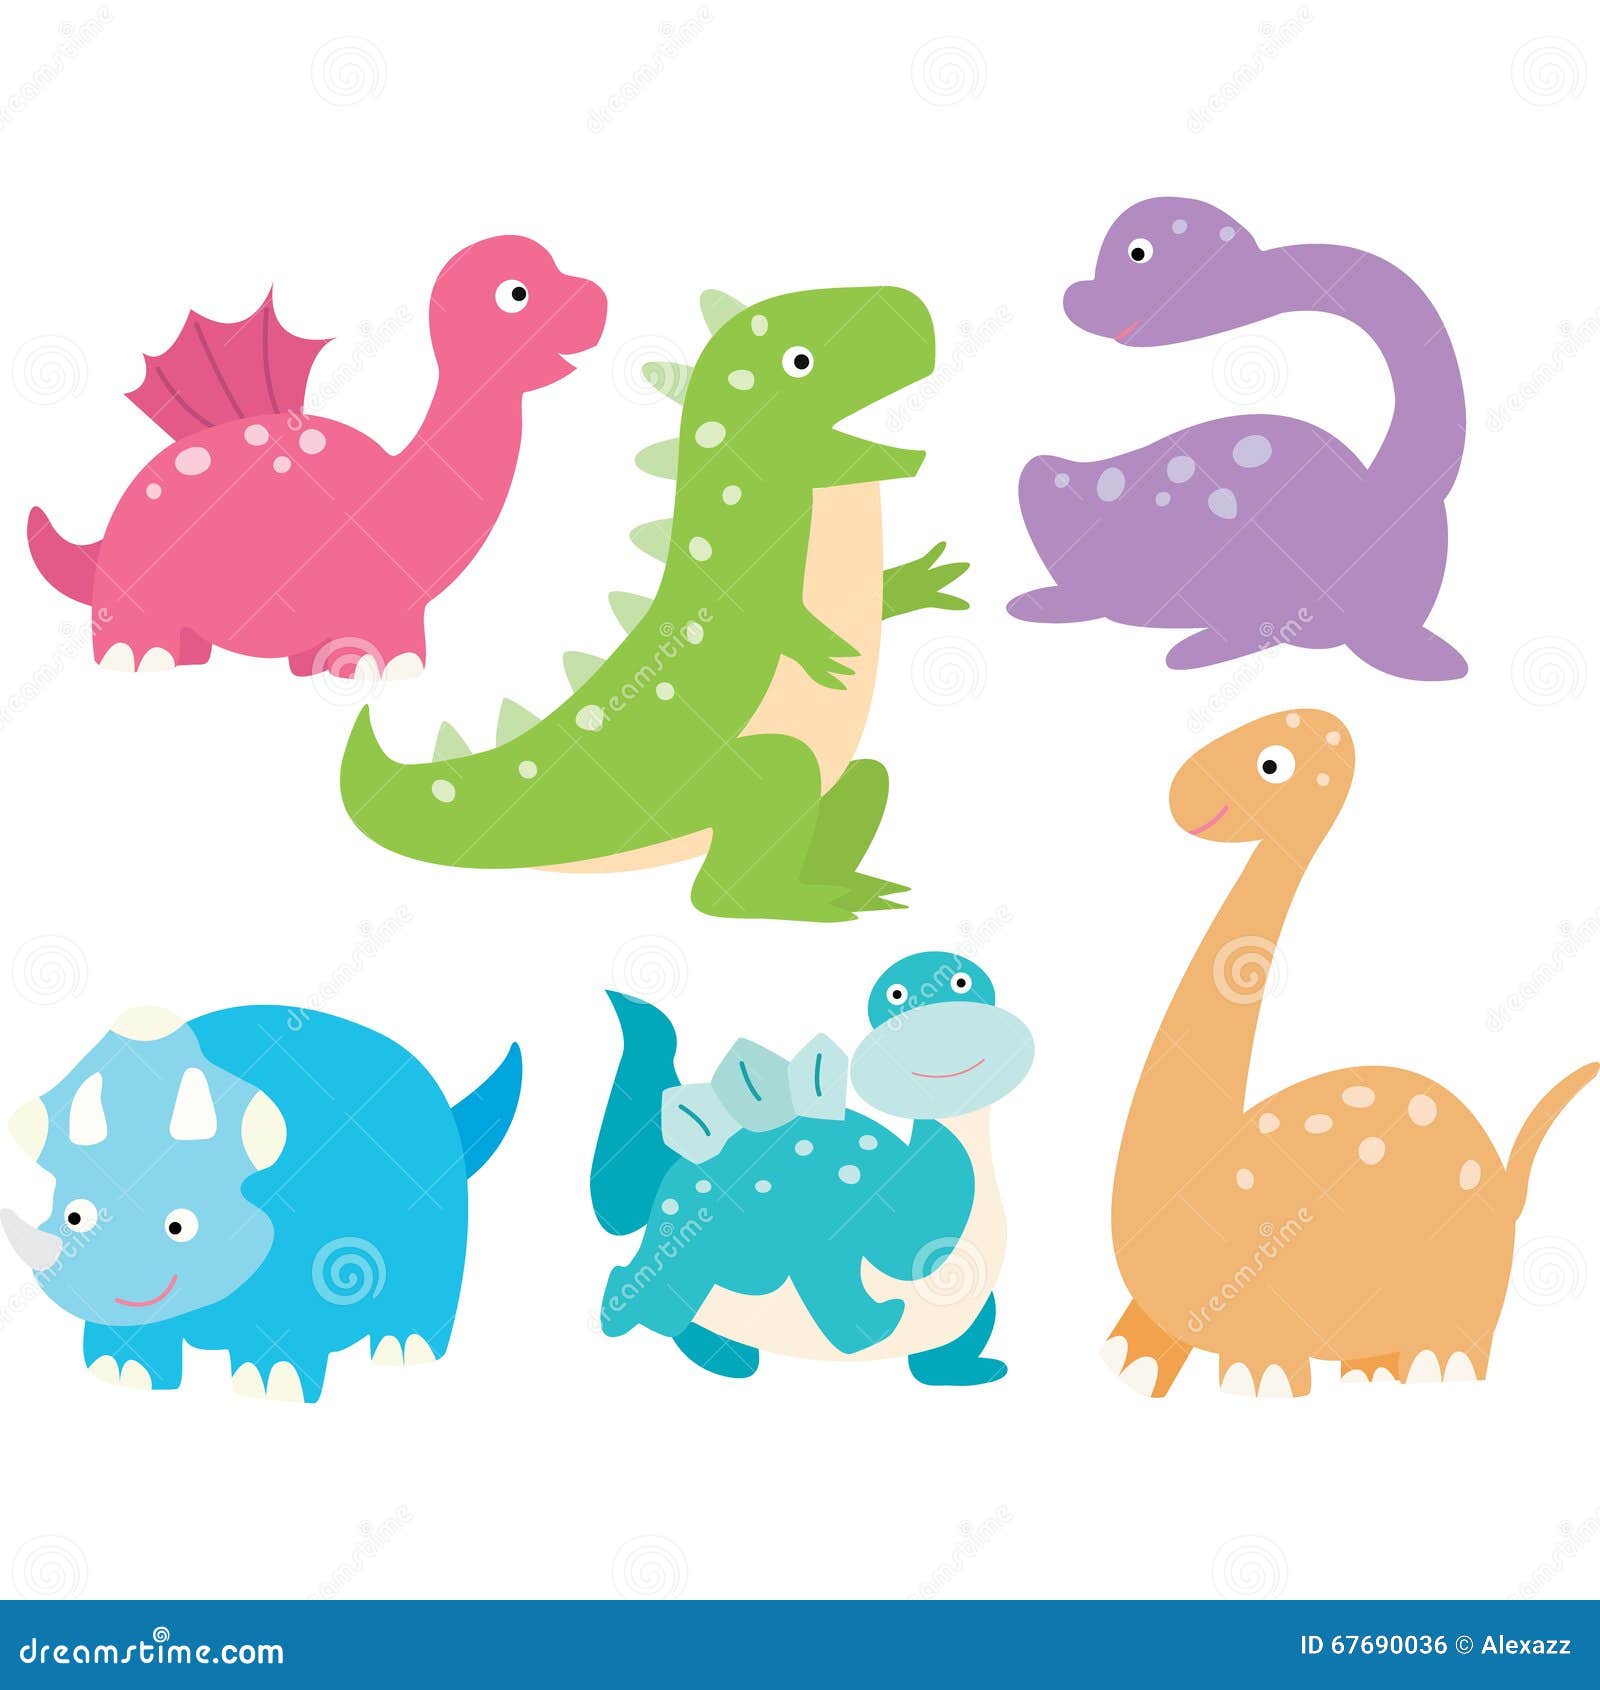 Cute Dinosaurs Collection stock vector. Illustration of dinosaurs ...